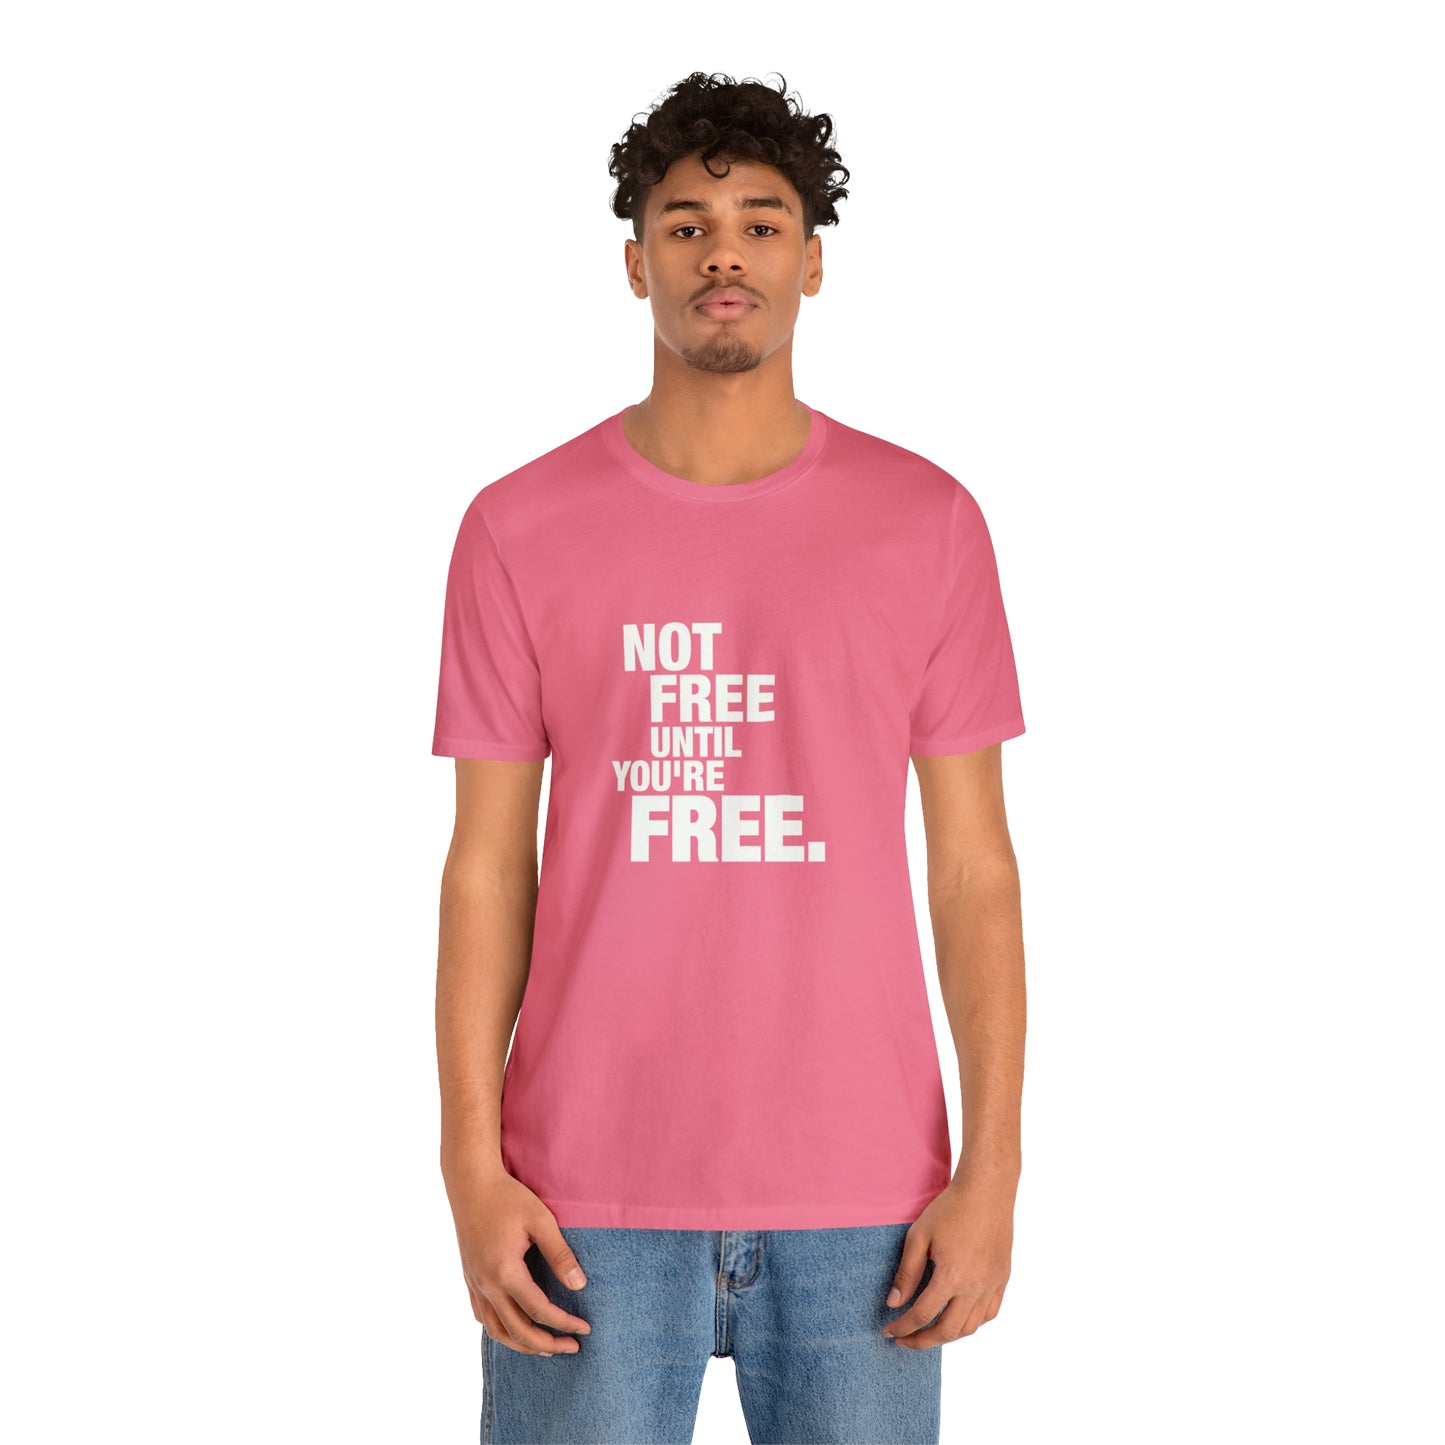 Not Free Until You're Free [T-Shirt]